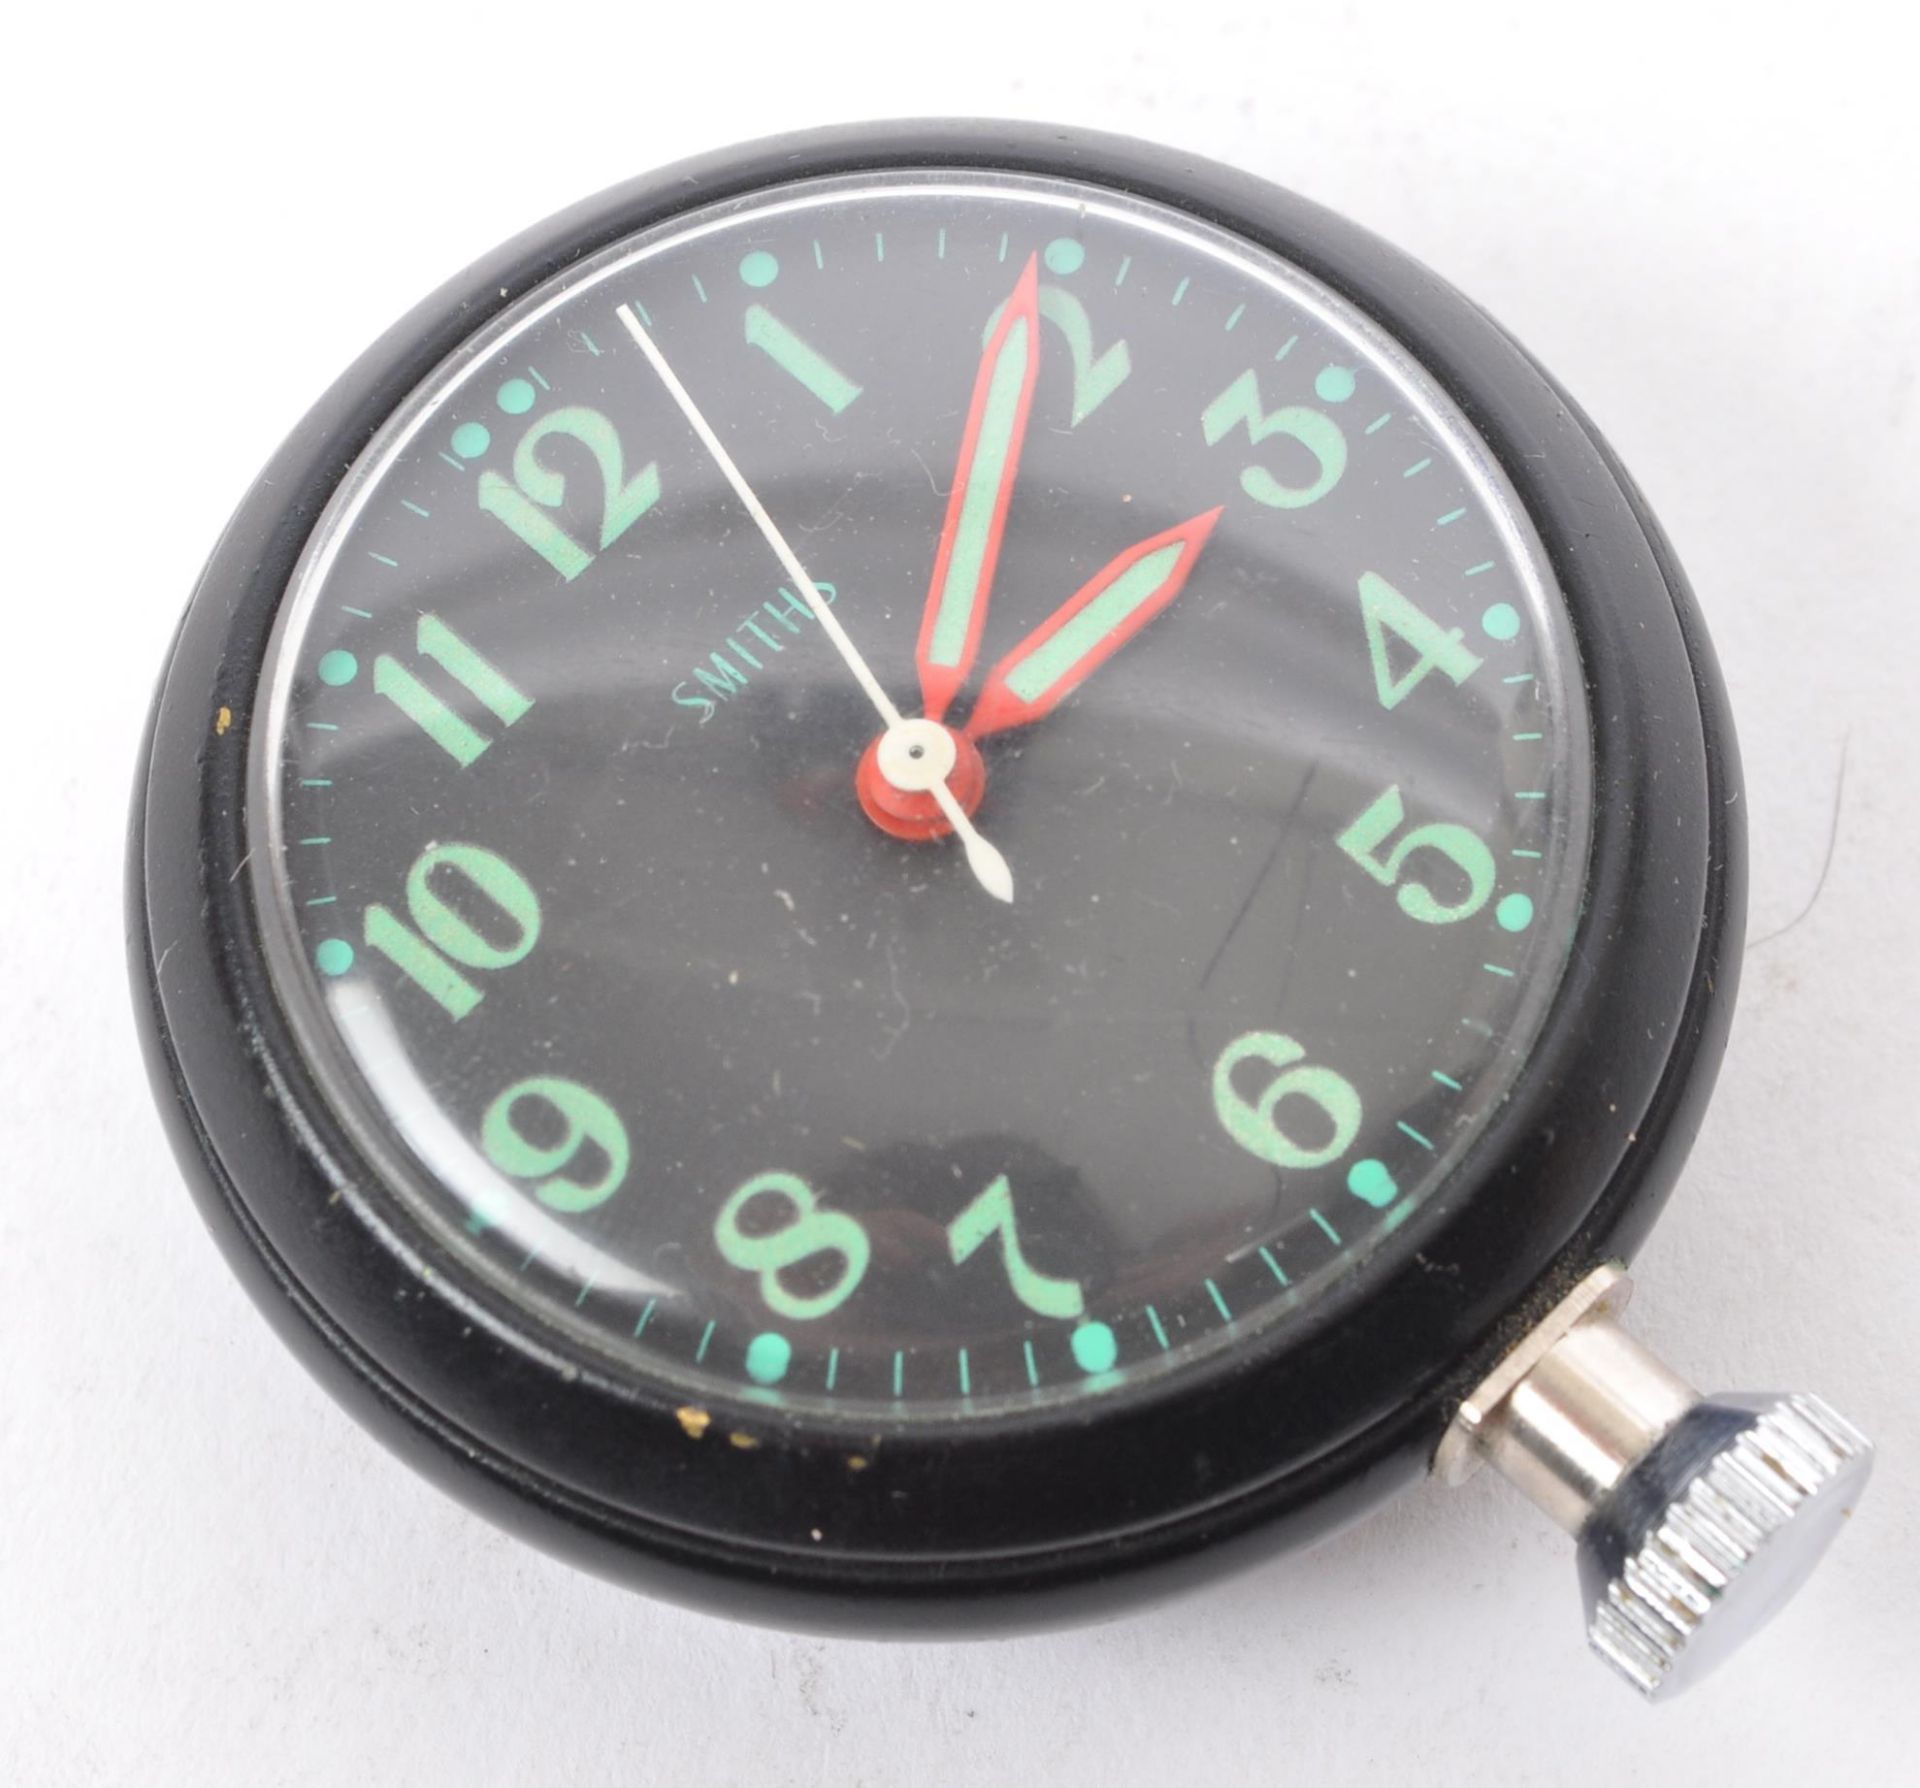 SMITHS AUTOMOBILE CAR DASHBOARD RALLY CLOCK TIME PIECE - Image 2 of 6